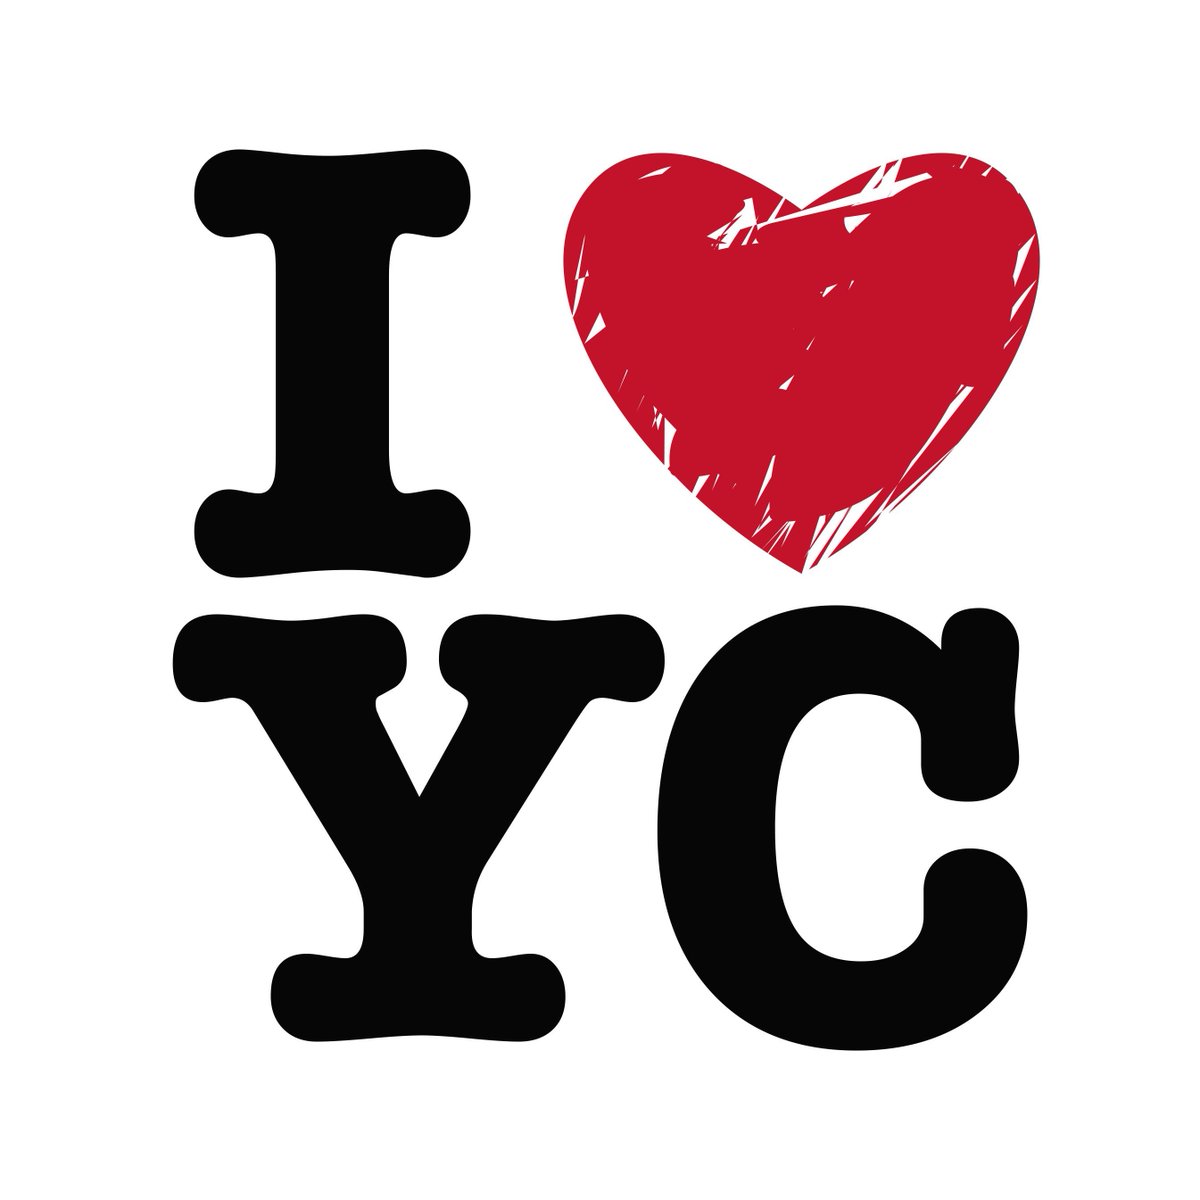 Elevate your legal financial game with YourCashier (YC)! Our commitment to excellence goes beyond transactions – it's about delivering personalised service that fits seamlessly into your legal operations. #ILoveYC #LegalCashiering #FinancialExcellence